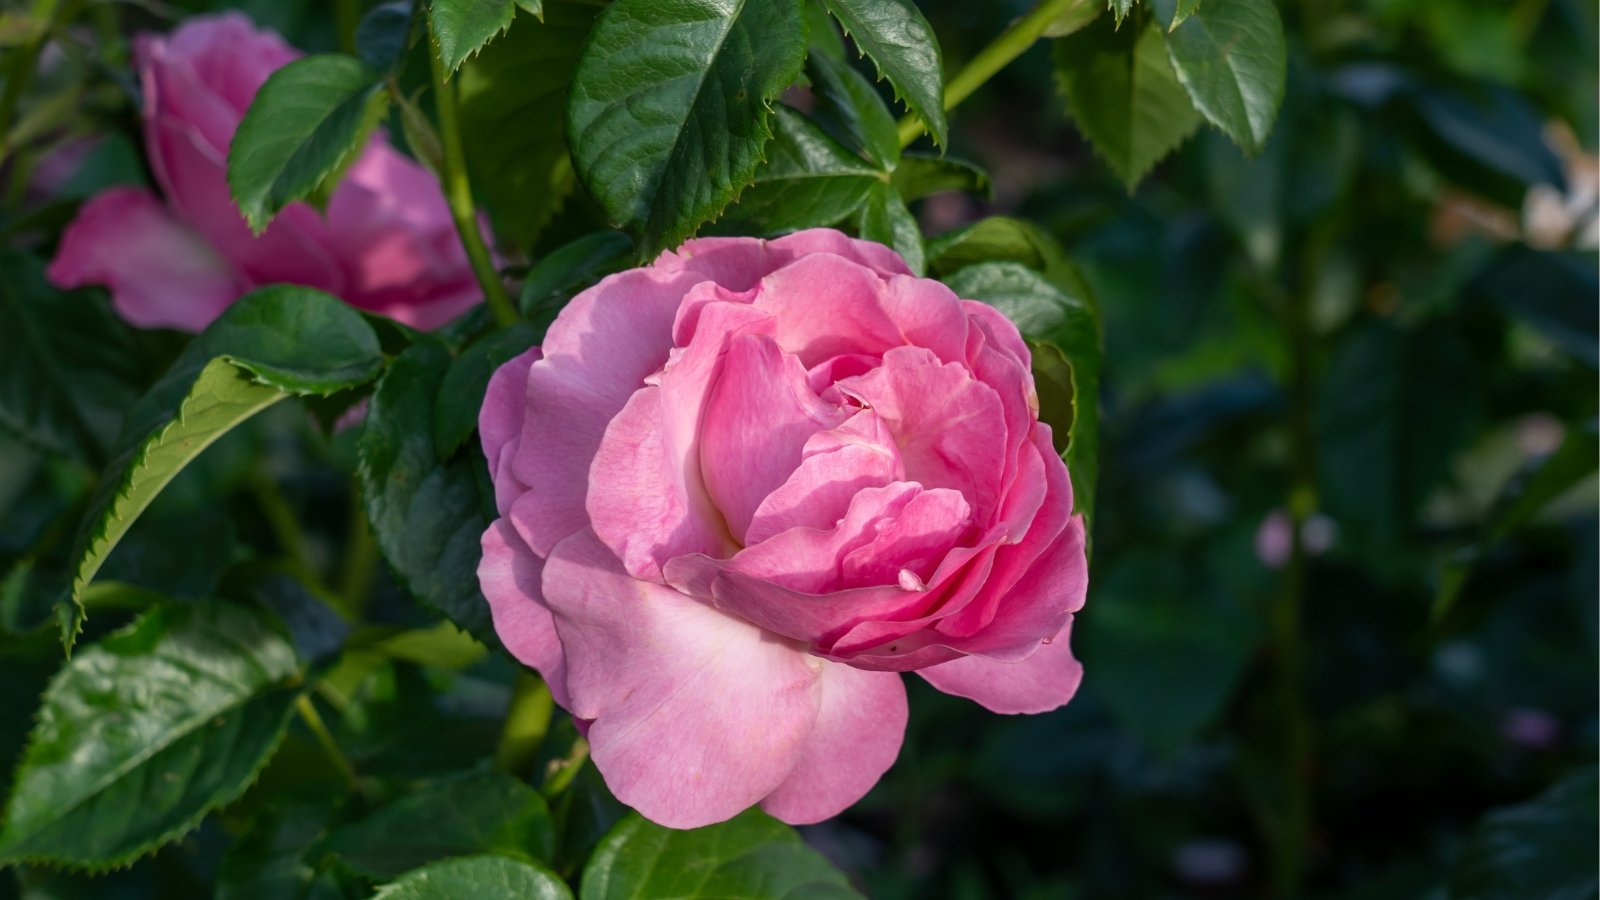 A pink 'All Dressed Up' rose blooms elegantly amidst deep green foliage, showcasing its delicate petals and exquisite beauty in a harmonious garden setting.